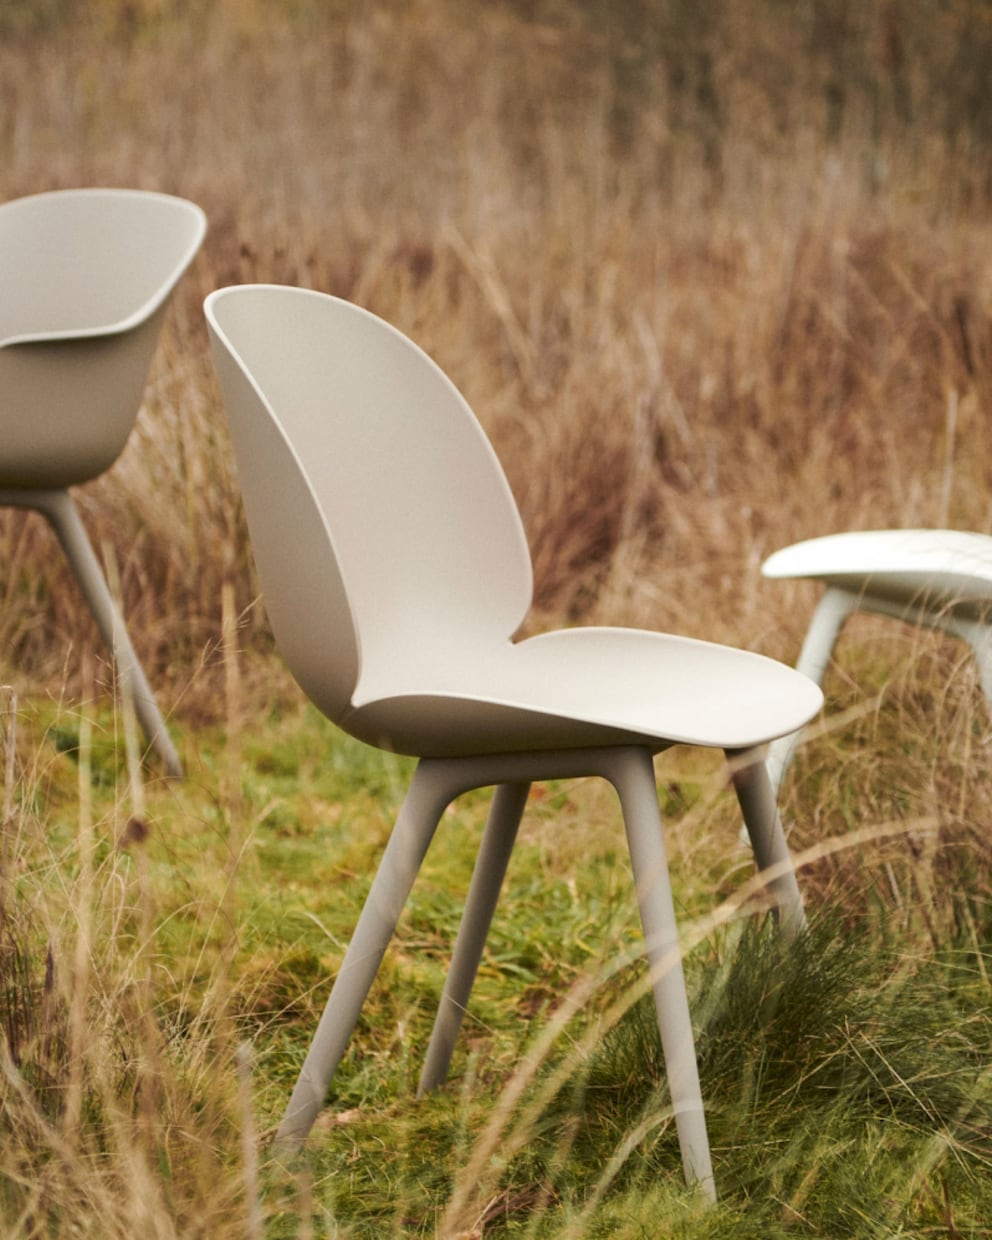 With its new UV-protected shell and legs, the iconic Beetle chair can now head outdoors. Image: Gubi